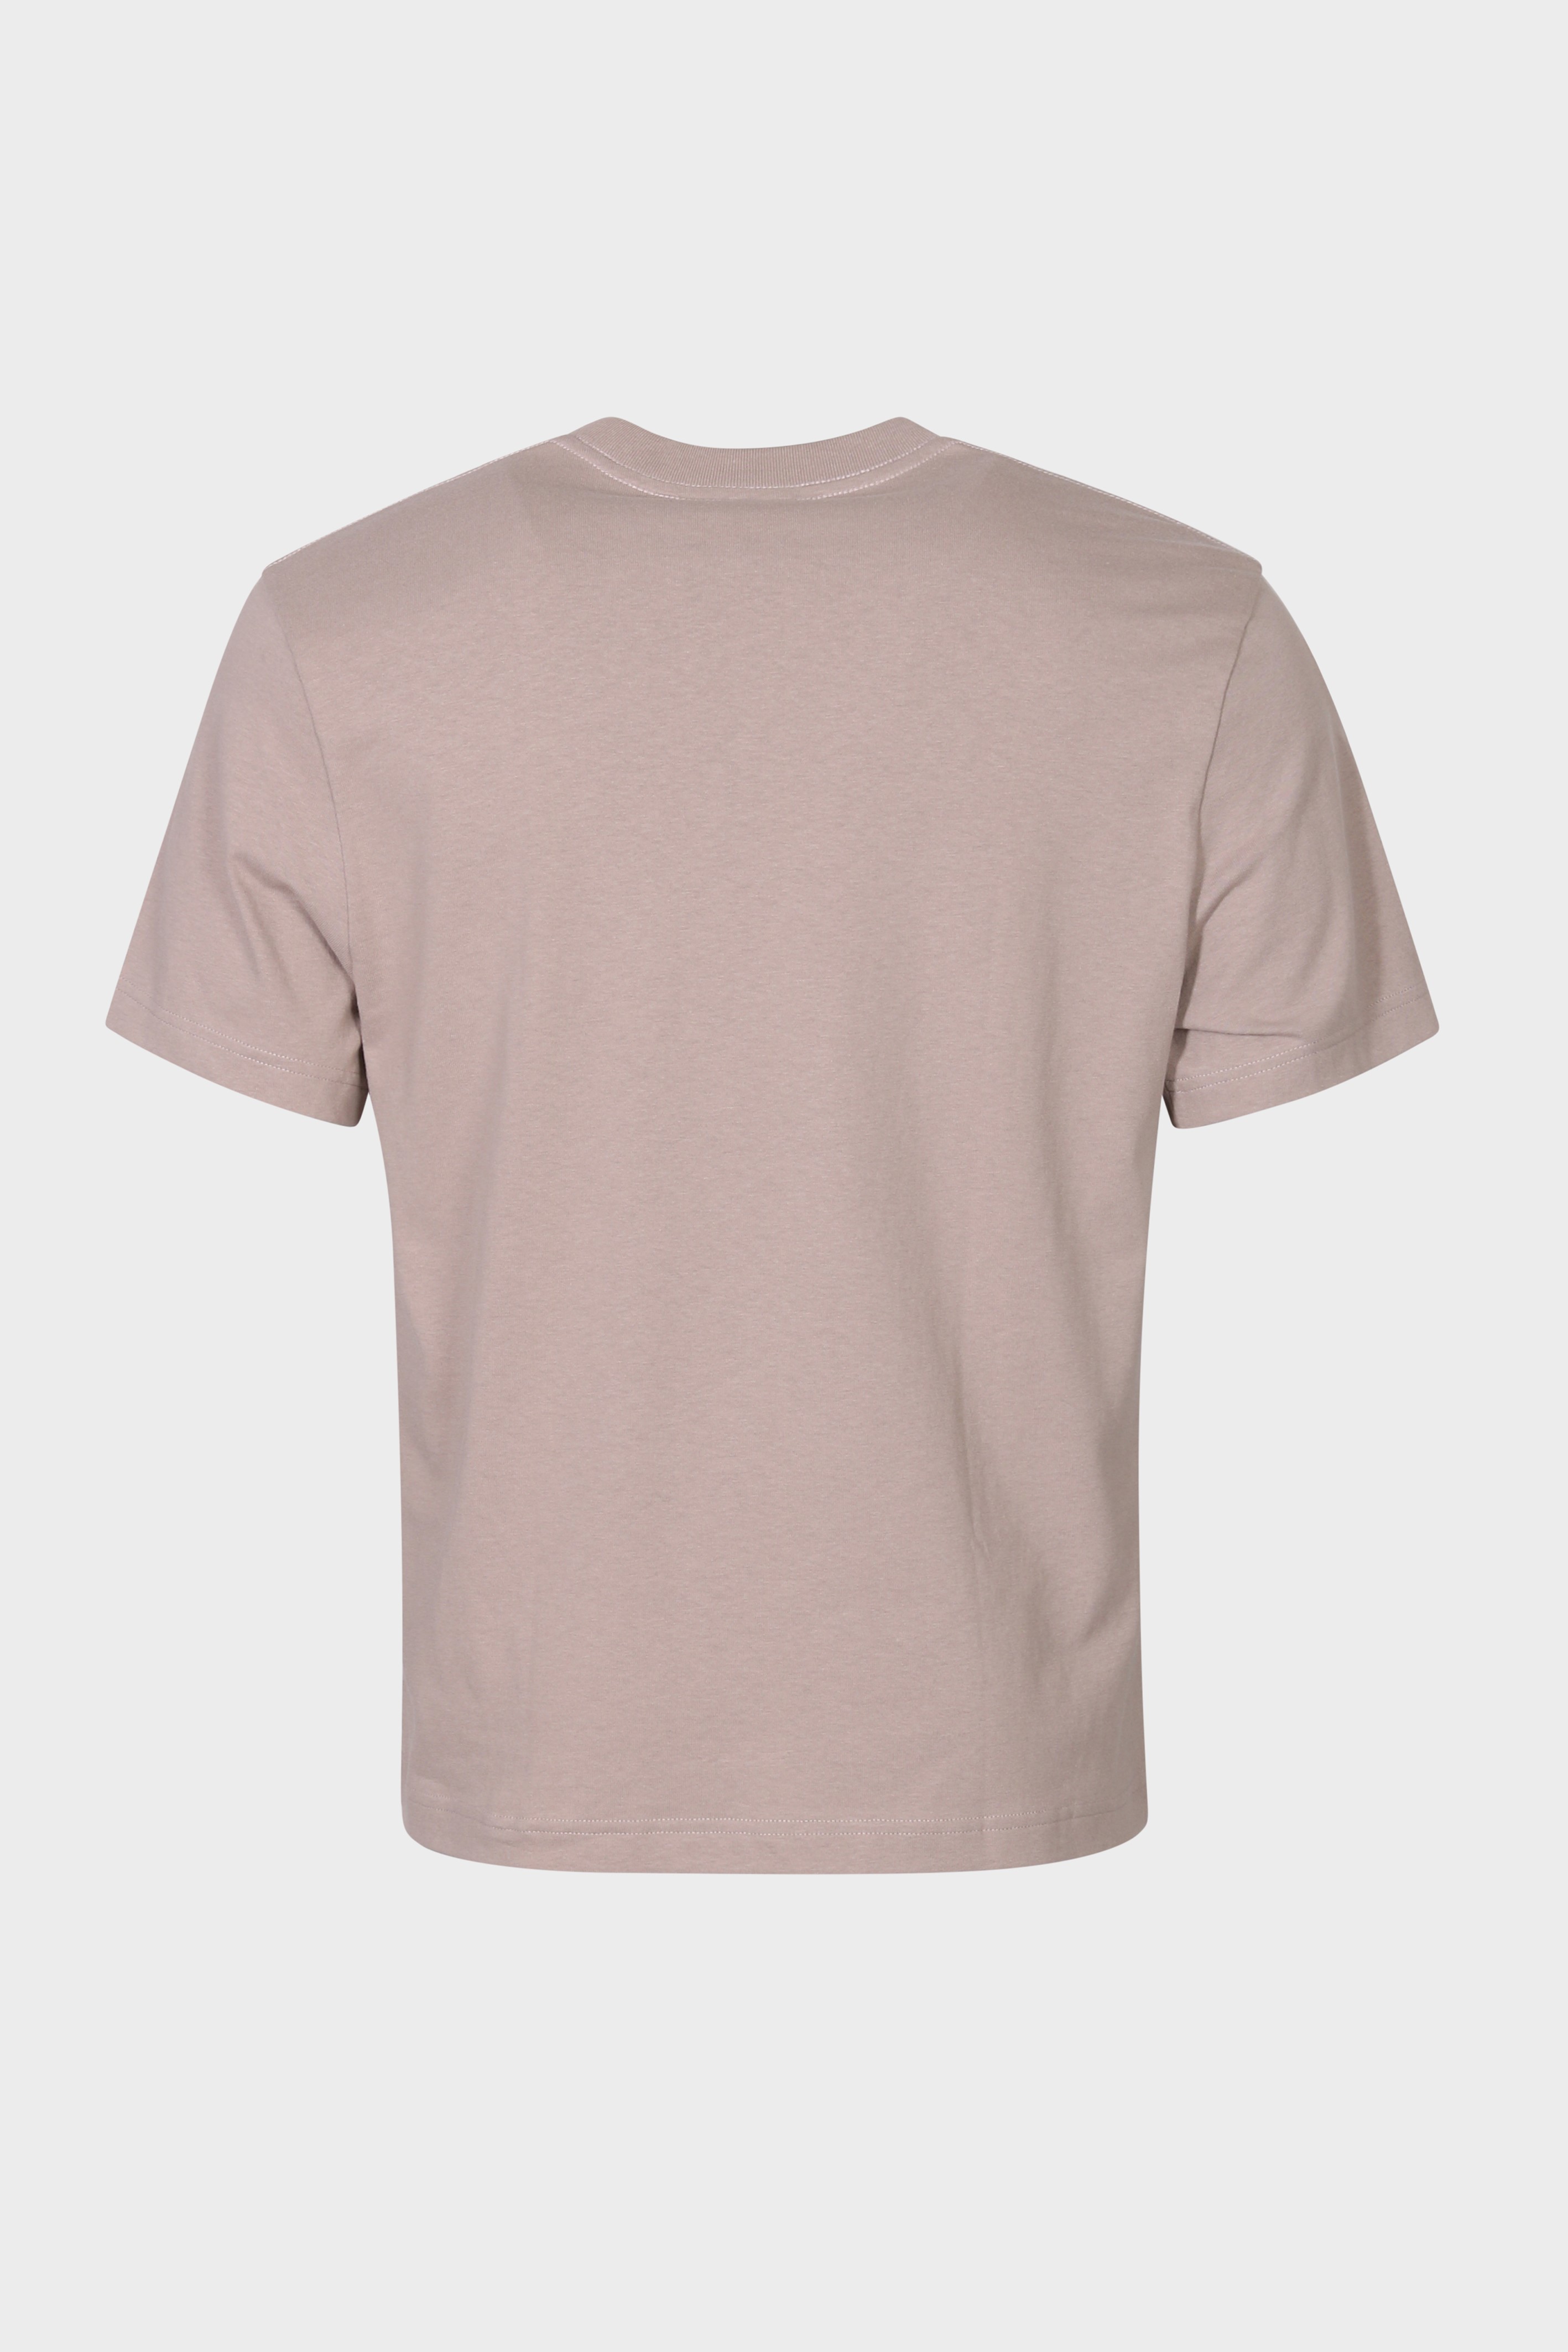 AXEL ARIGATO Legacy T-Shirt in Taupe M